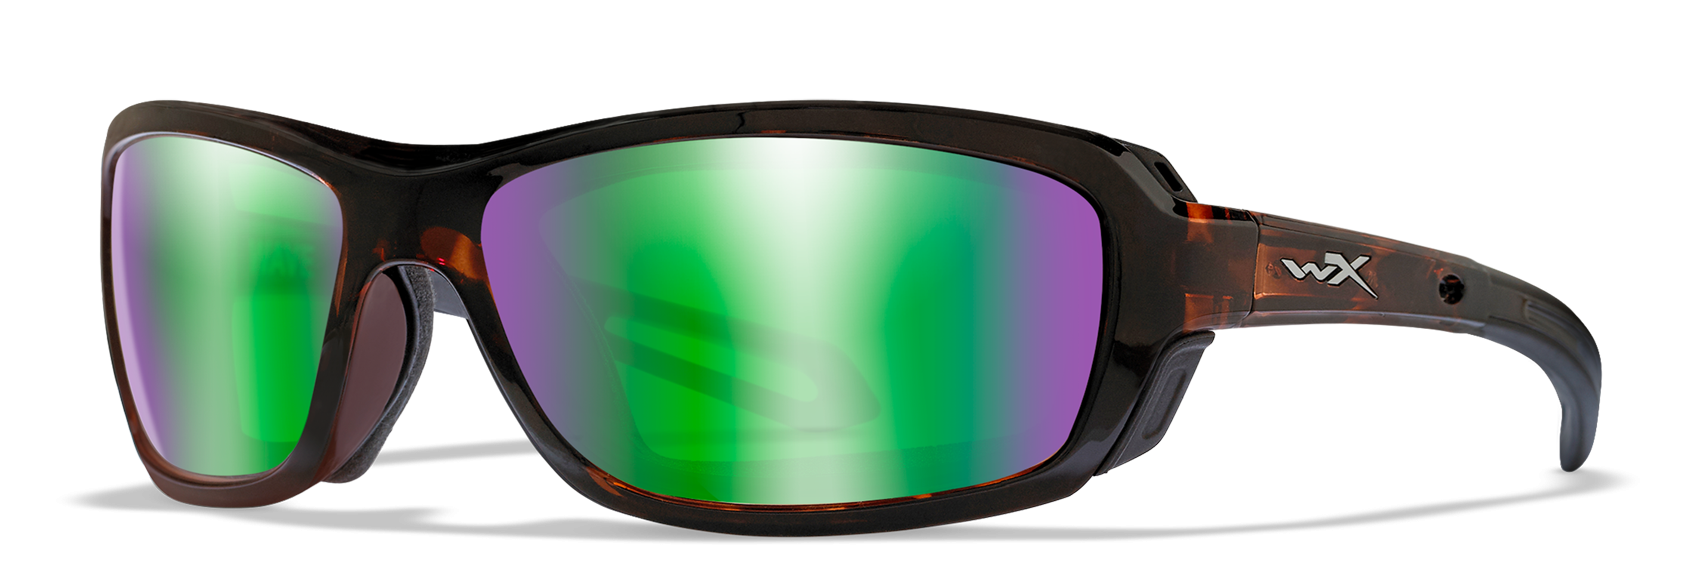 WILEY X BREACH Sunglasses with Removable Facial Cavity Seal - ScoutTech